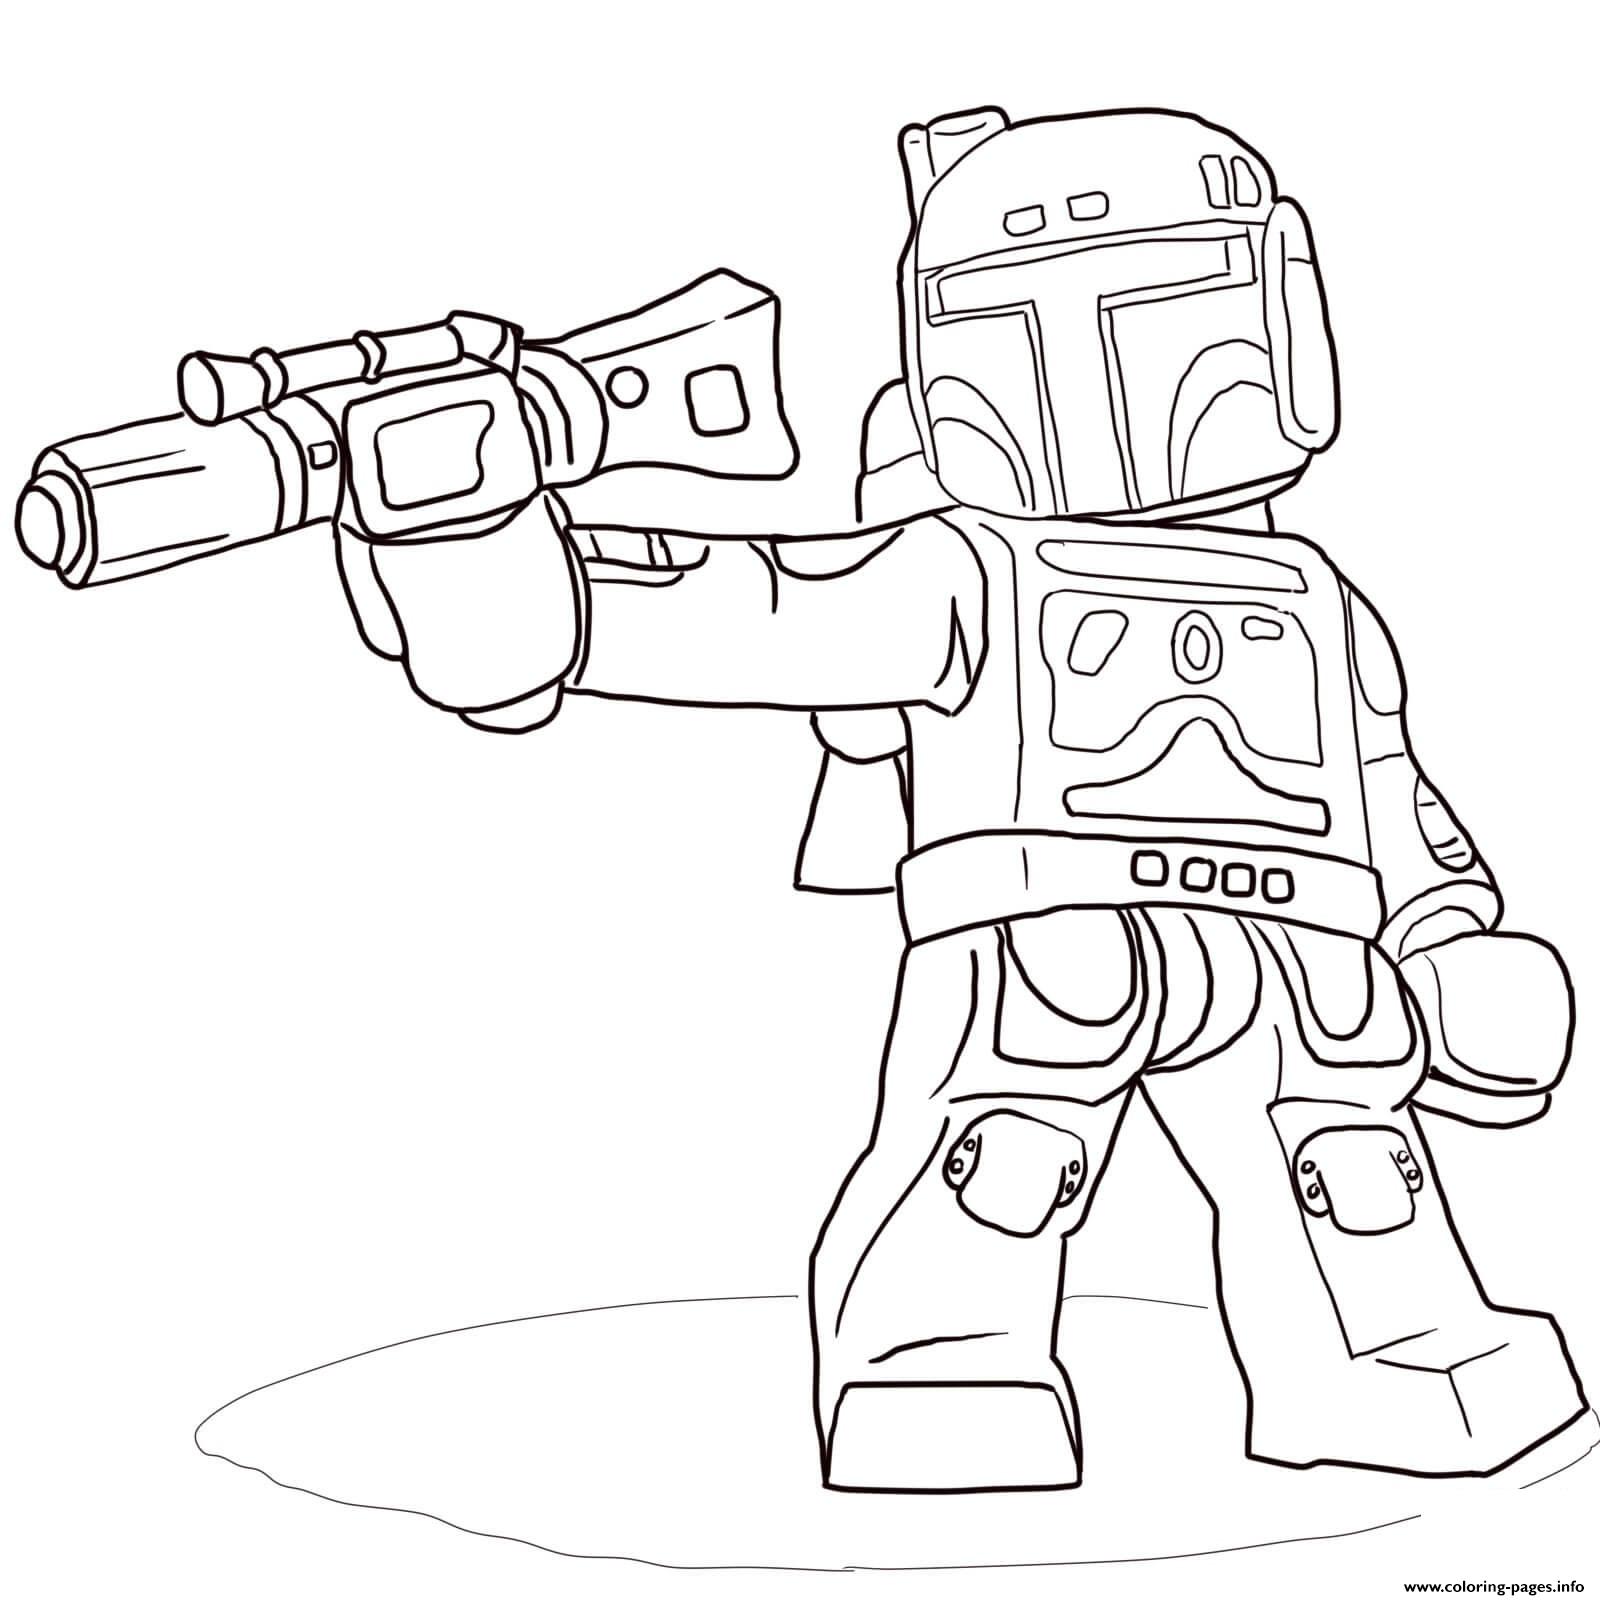 Download Lego Star Wars Boba Fett Coloring Pages Printable